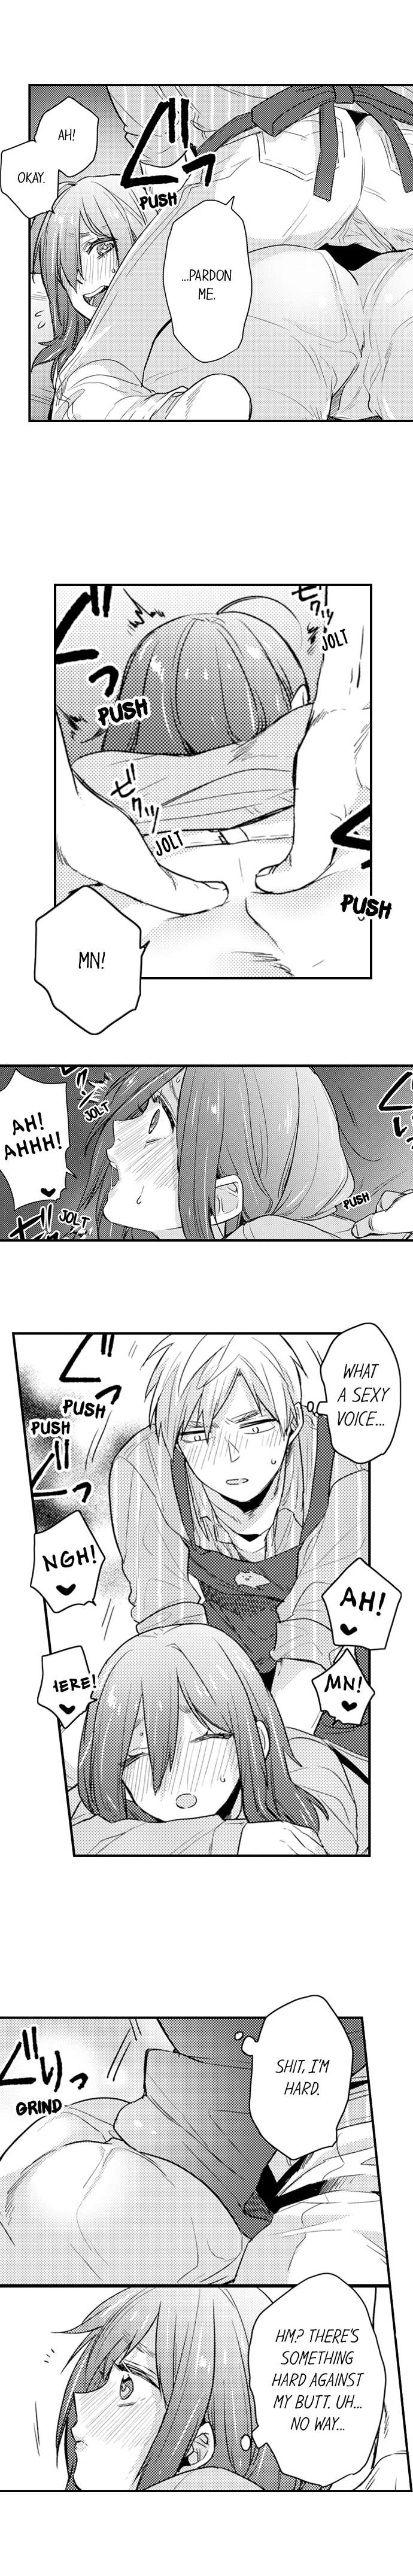 The Massage ♂♀ The Pleasure of Full Course Sex - Chapter 4 Page 5